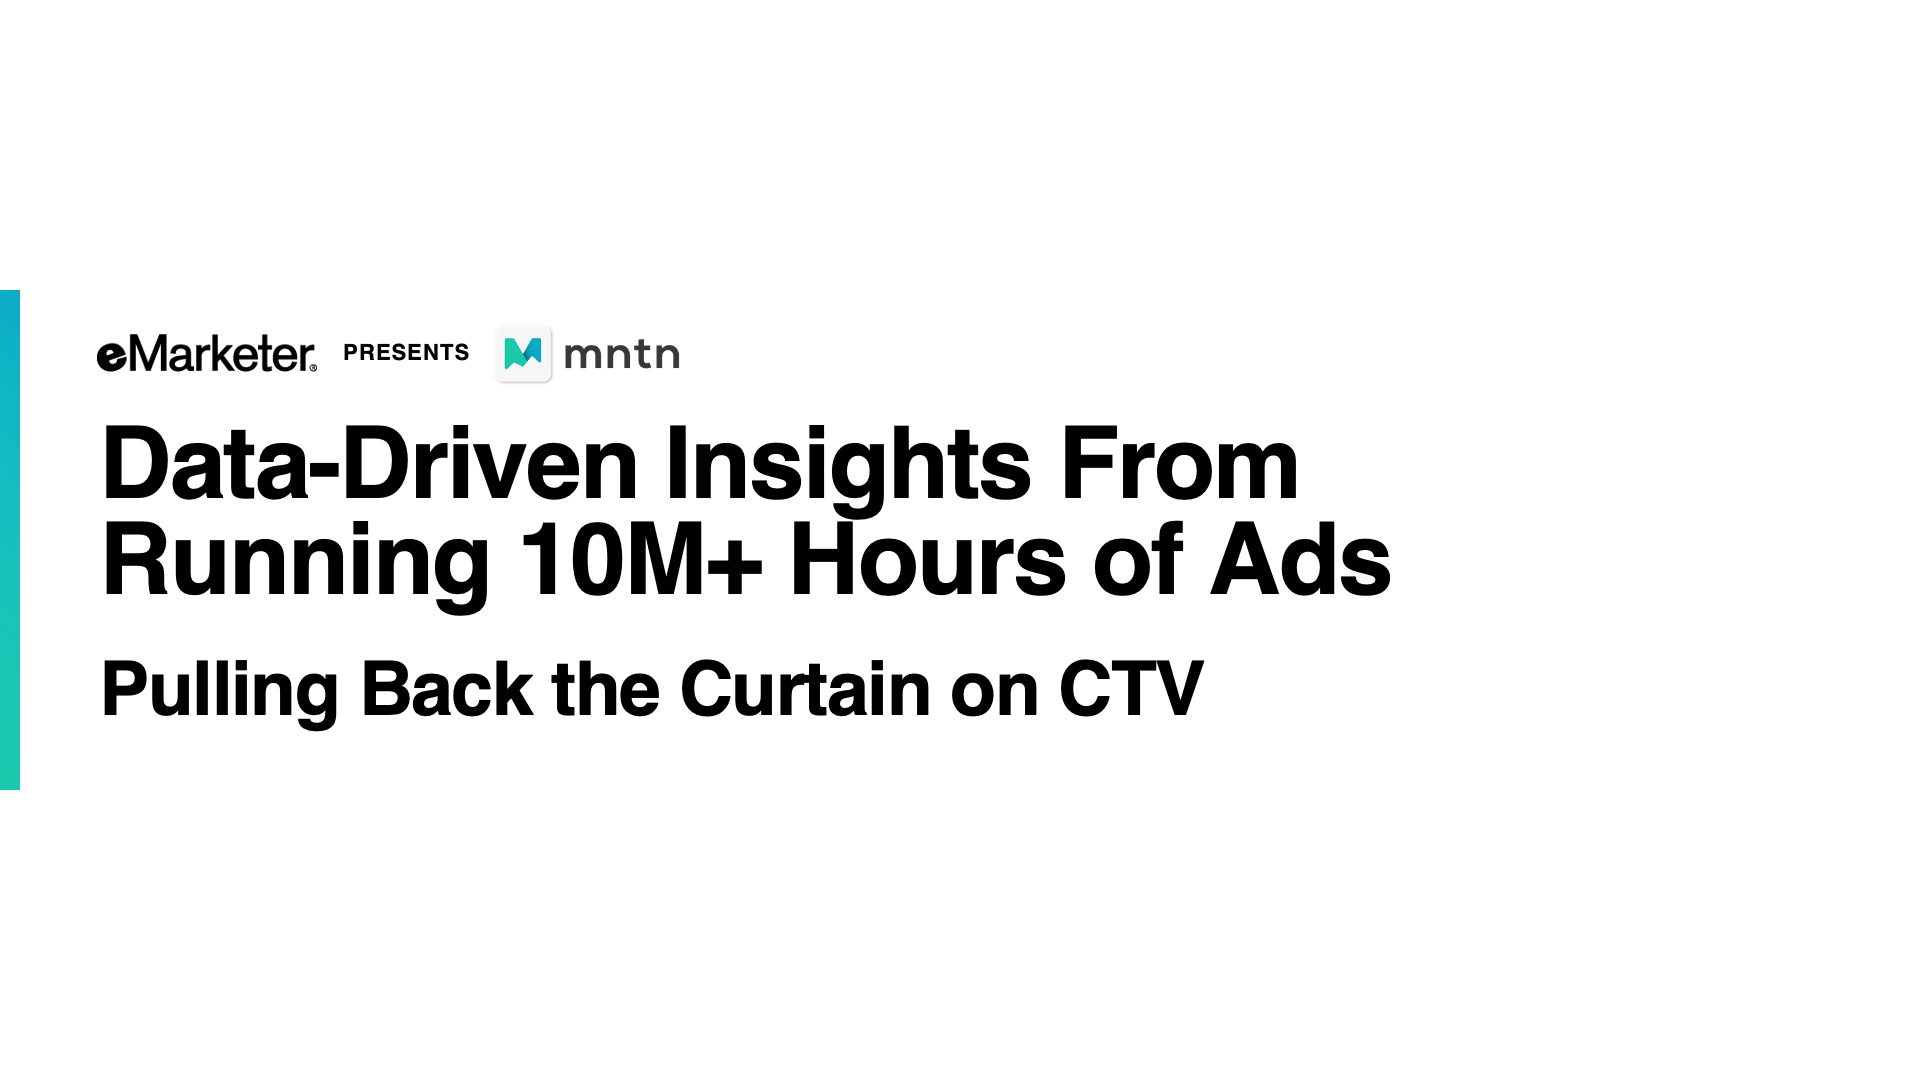 Data-Driven Insights From Running 10M+ Hours of Ads: Pulling the Curtain Back on CTV